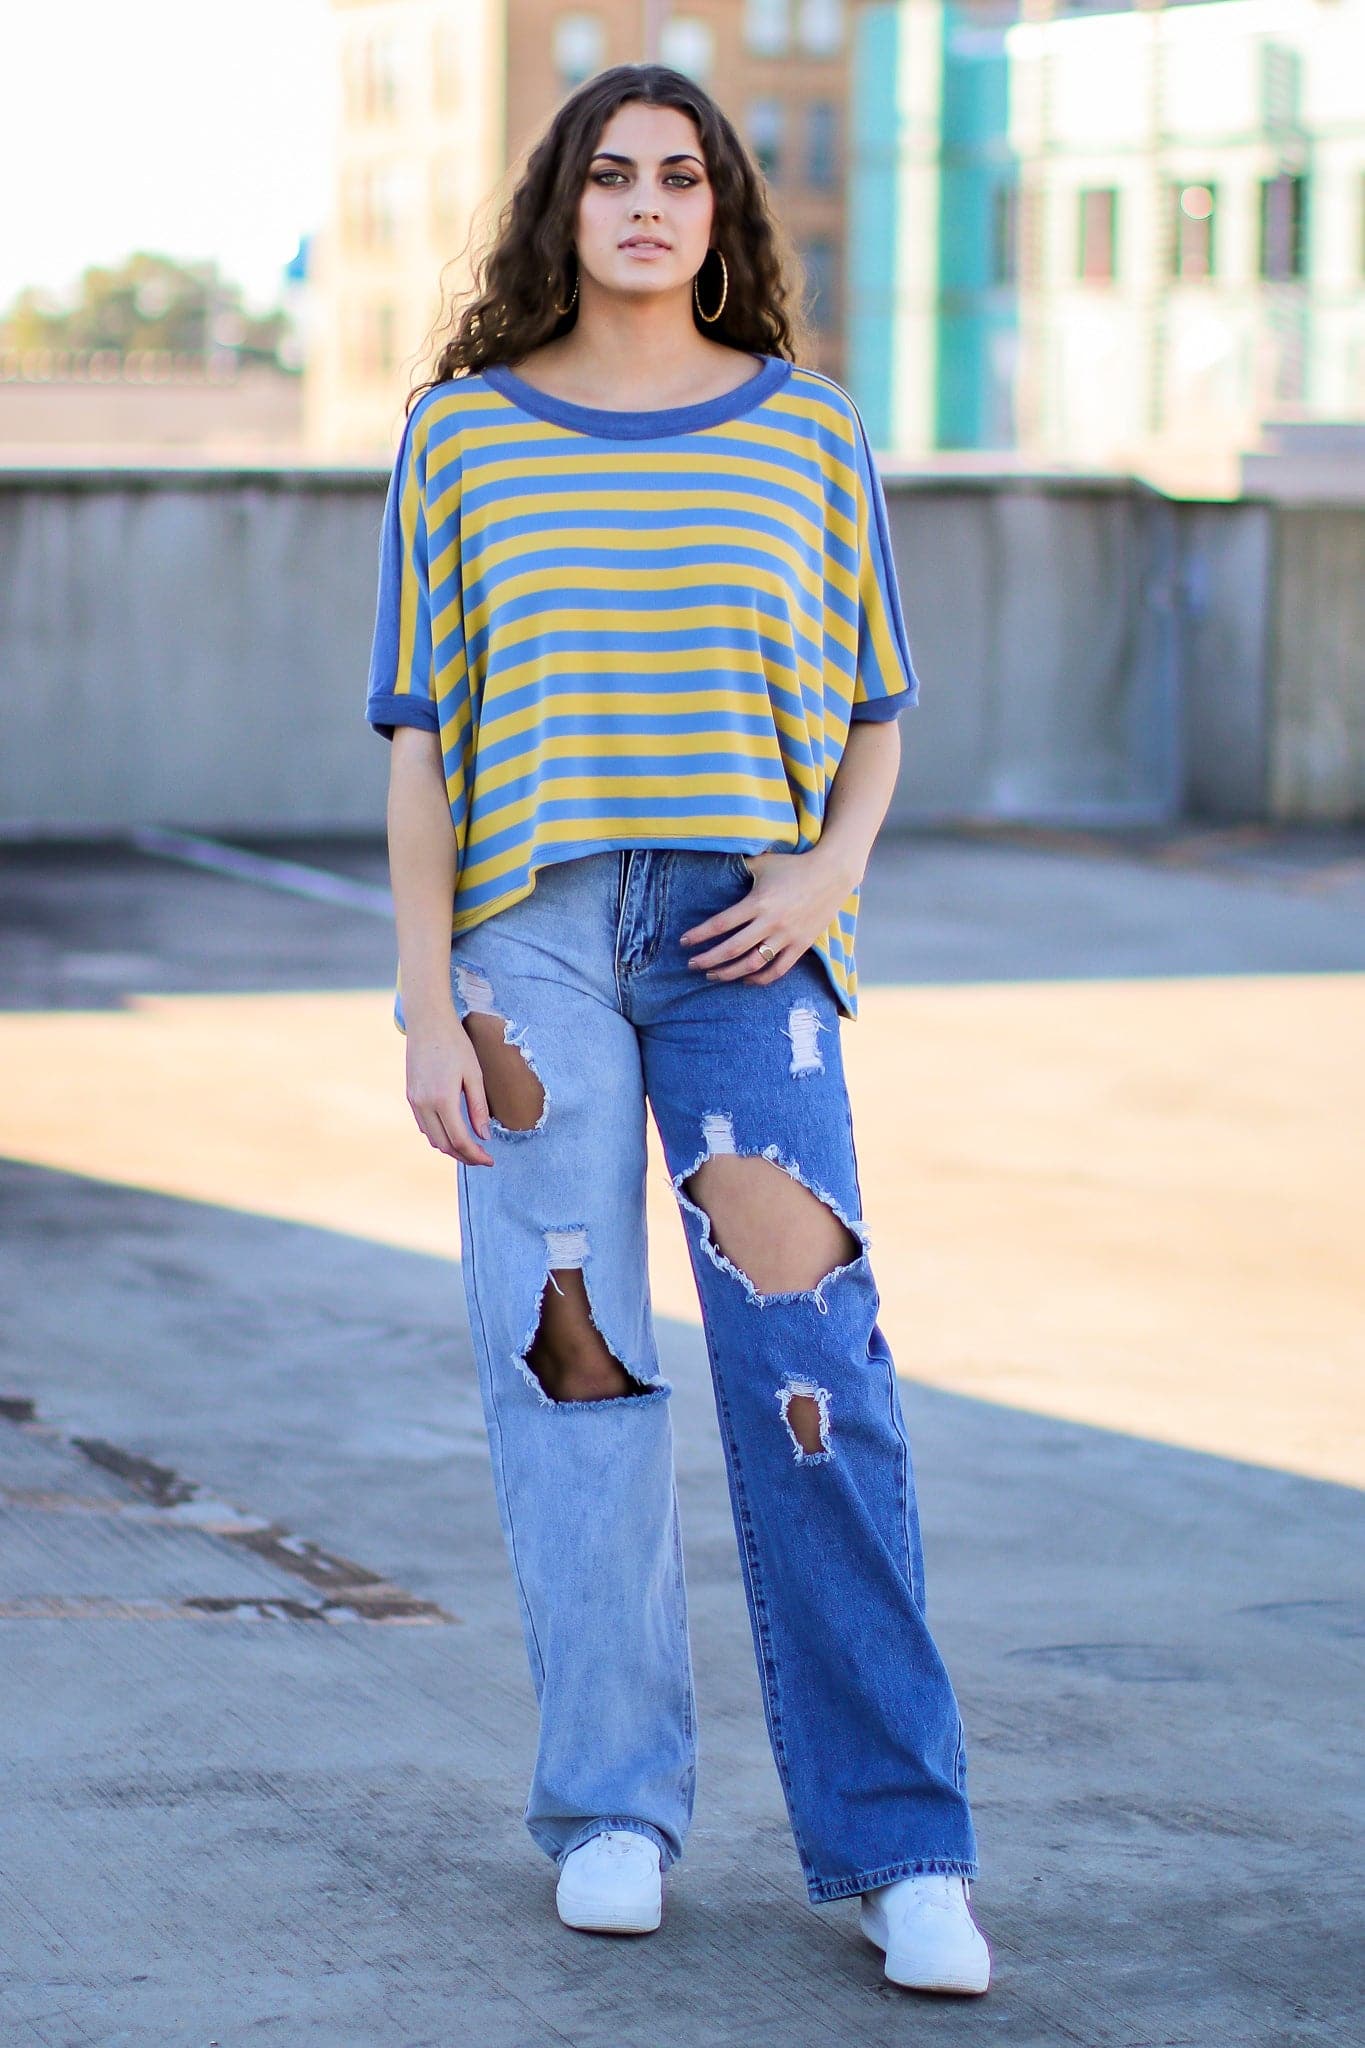  Pure Ambition Striped Dolman Sleeve Top - FINAL SALE - Madison and Mallory